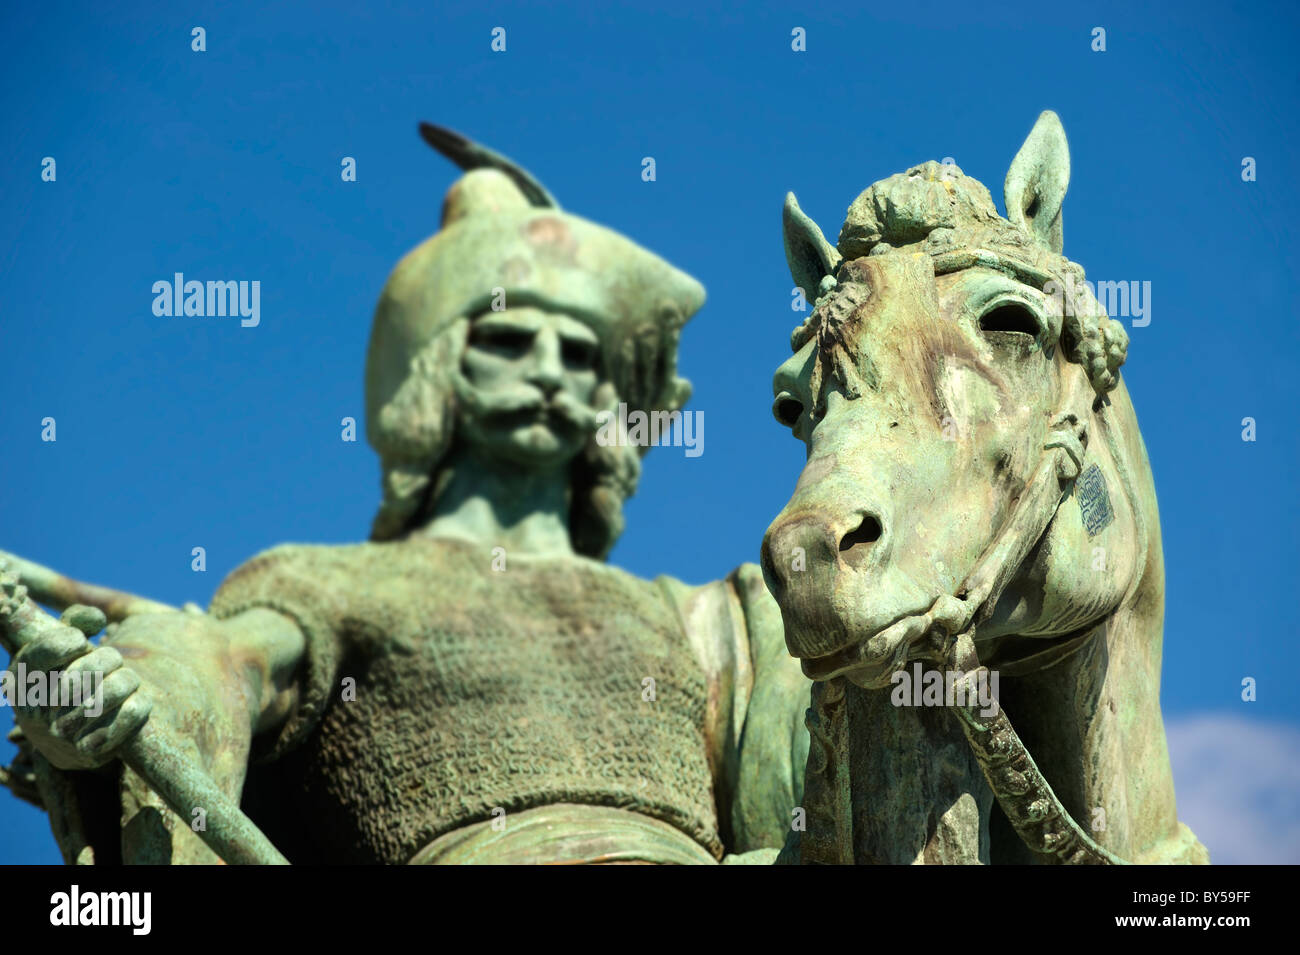 One of the Hungarian Chieftans - Hősök tere, ( Heroes Square ) Budapest Hungary Stock Photo